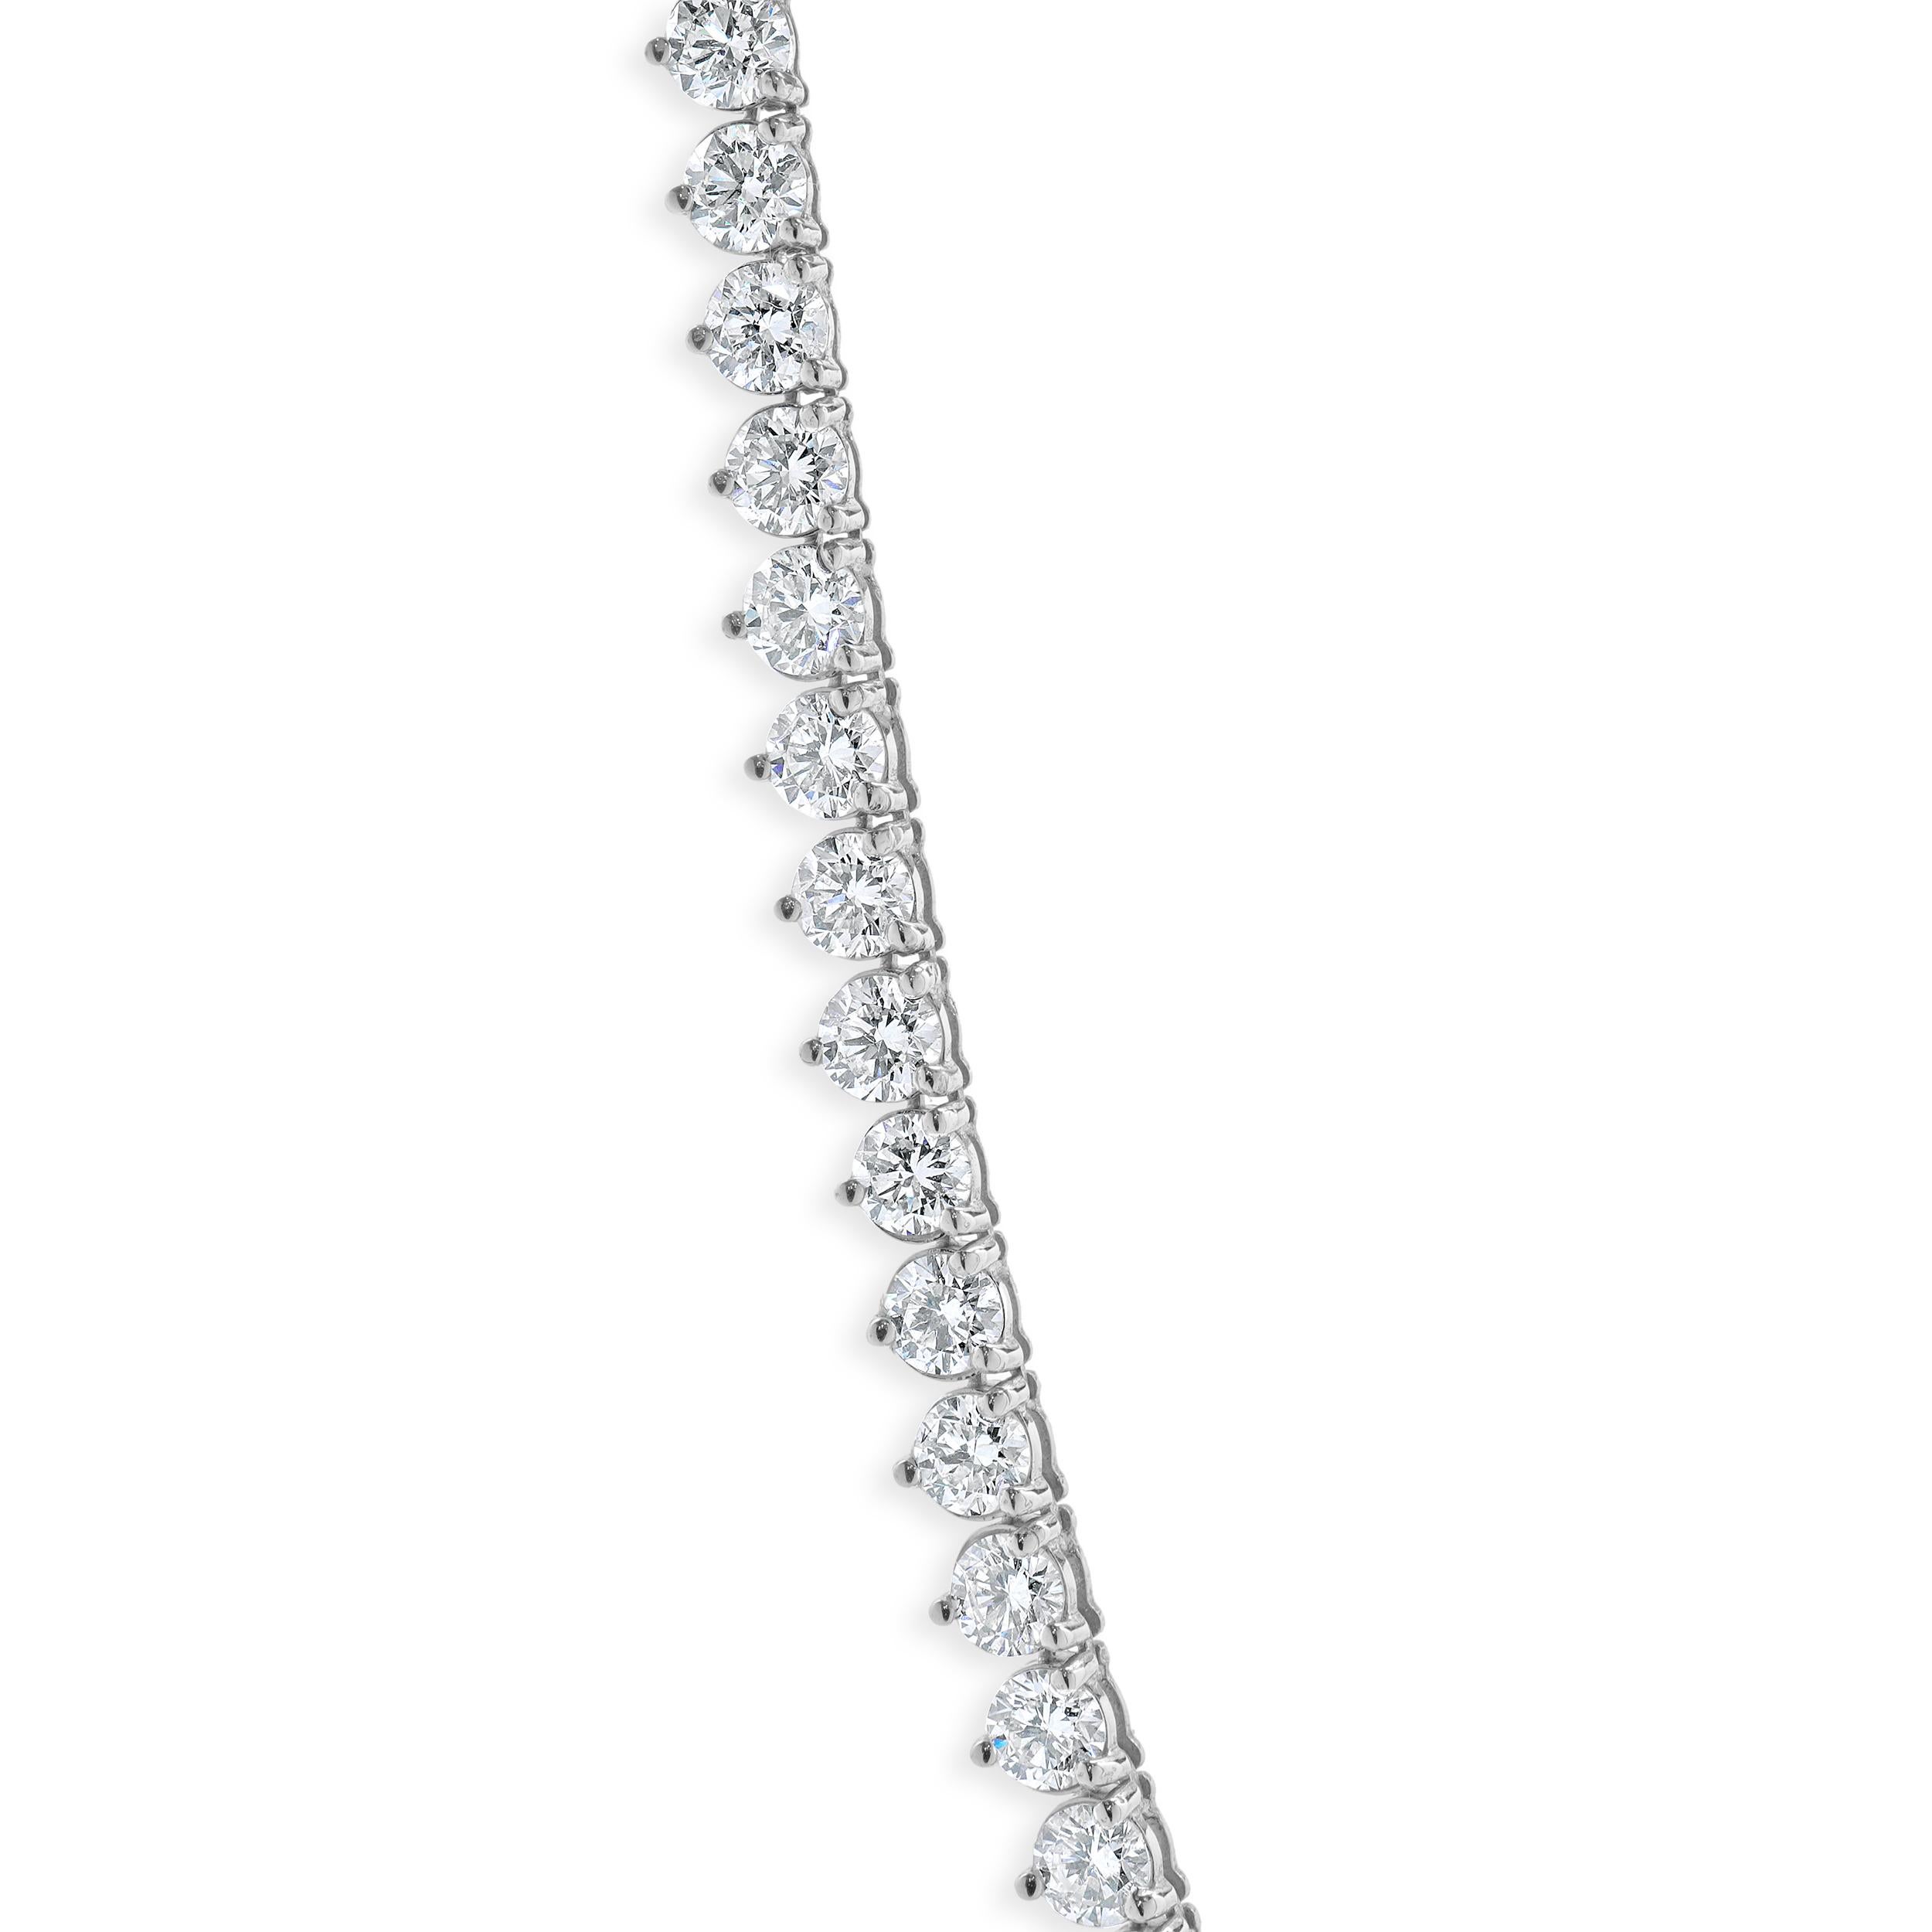 Designer: custom
Material: 14K white gold
Diamonds: 71 round brilliant cut = 10.65cttw
Color: H
Clarity: SI1-2
Dimensions: necklace measures 14-inches in length
Weight: 13.45 grams